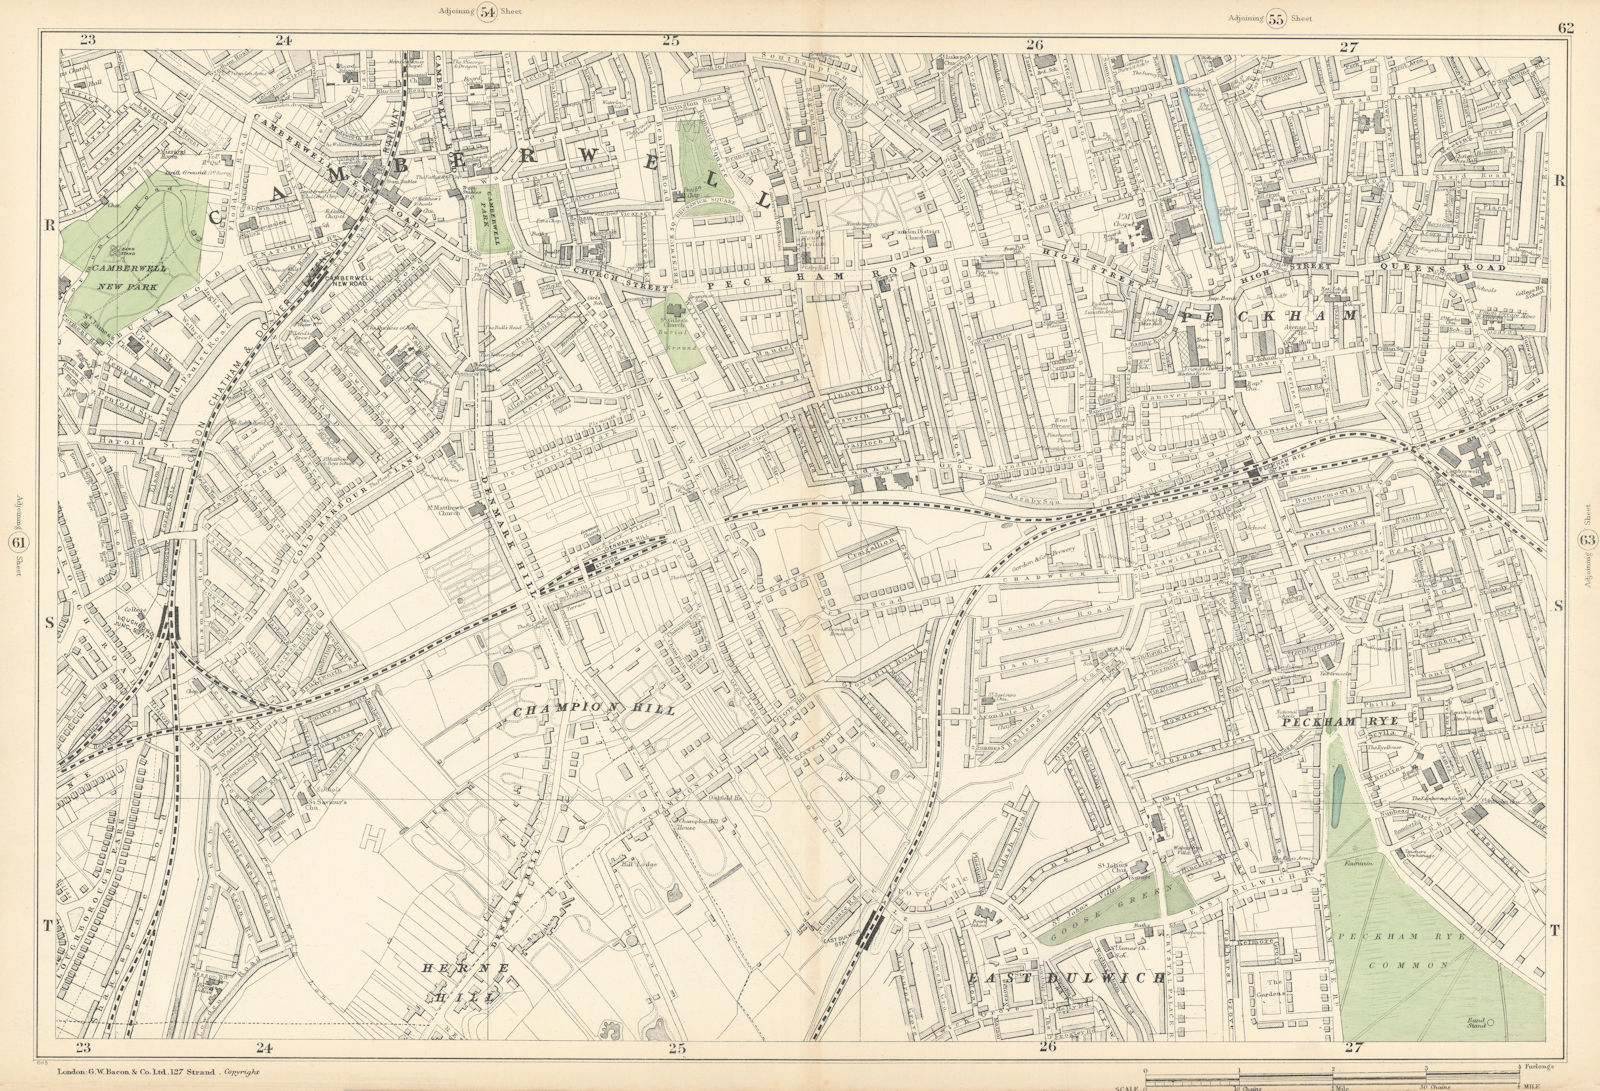 Associate Product CAMBERWELL Peckham Rye East Dulwich Herne Hill Denmark Hill 1900 old map